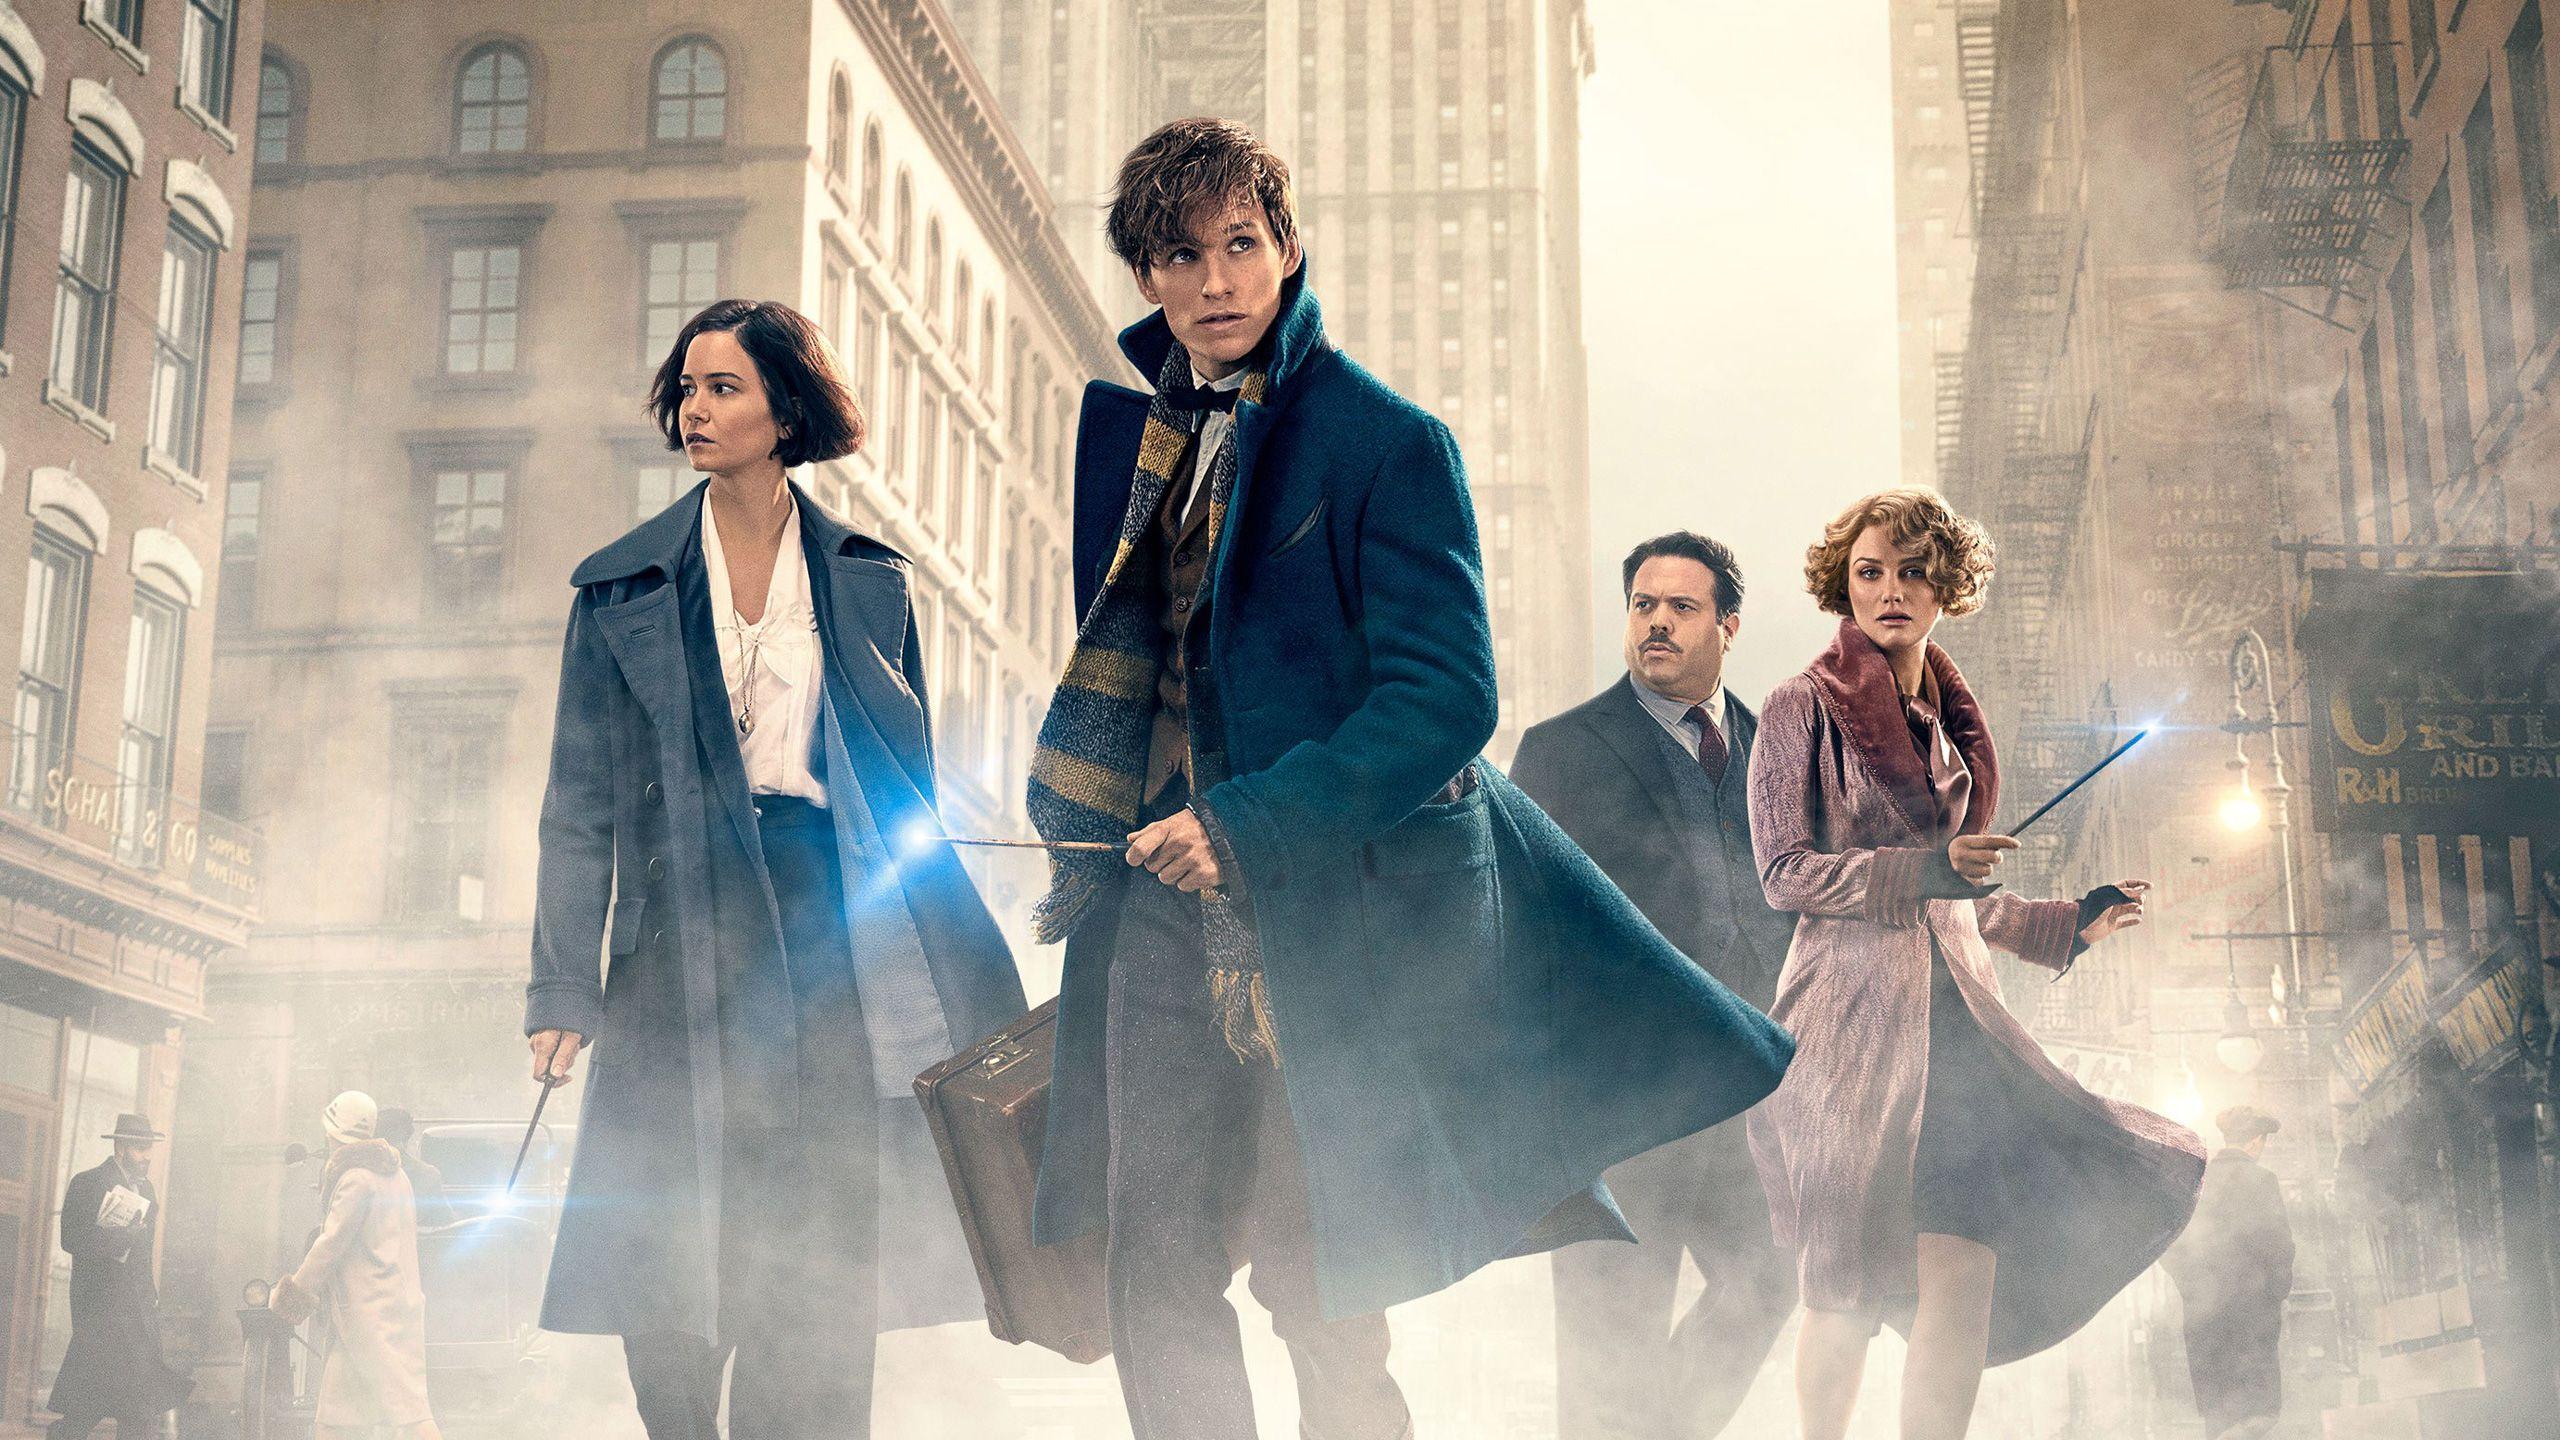 Download Fantastic Beasts And Where To Find Them Movie HD 4k